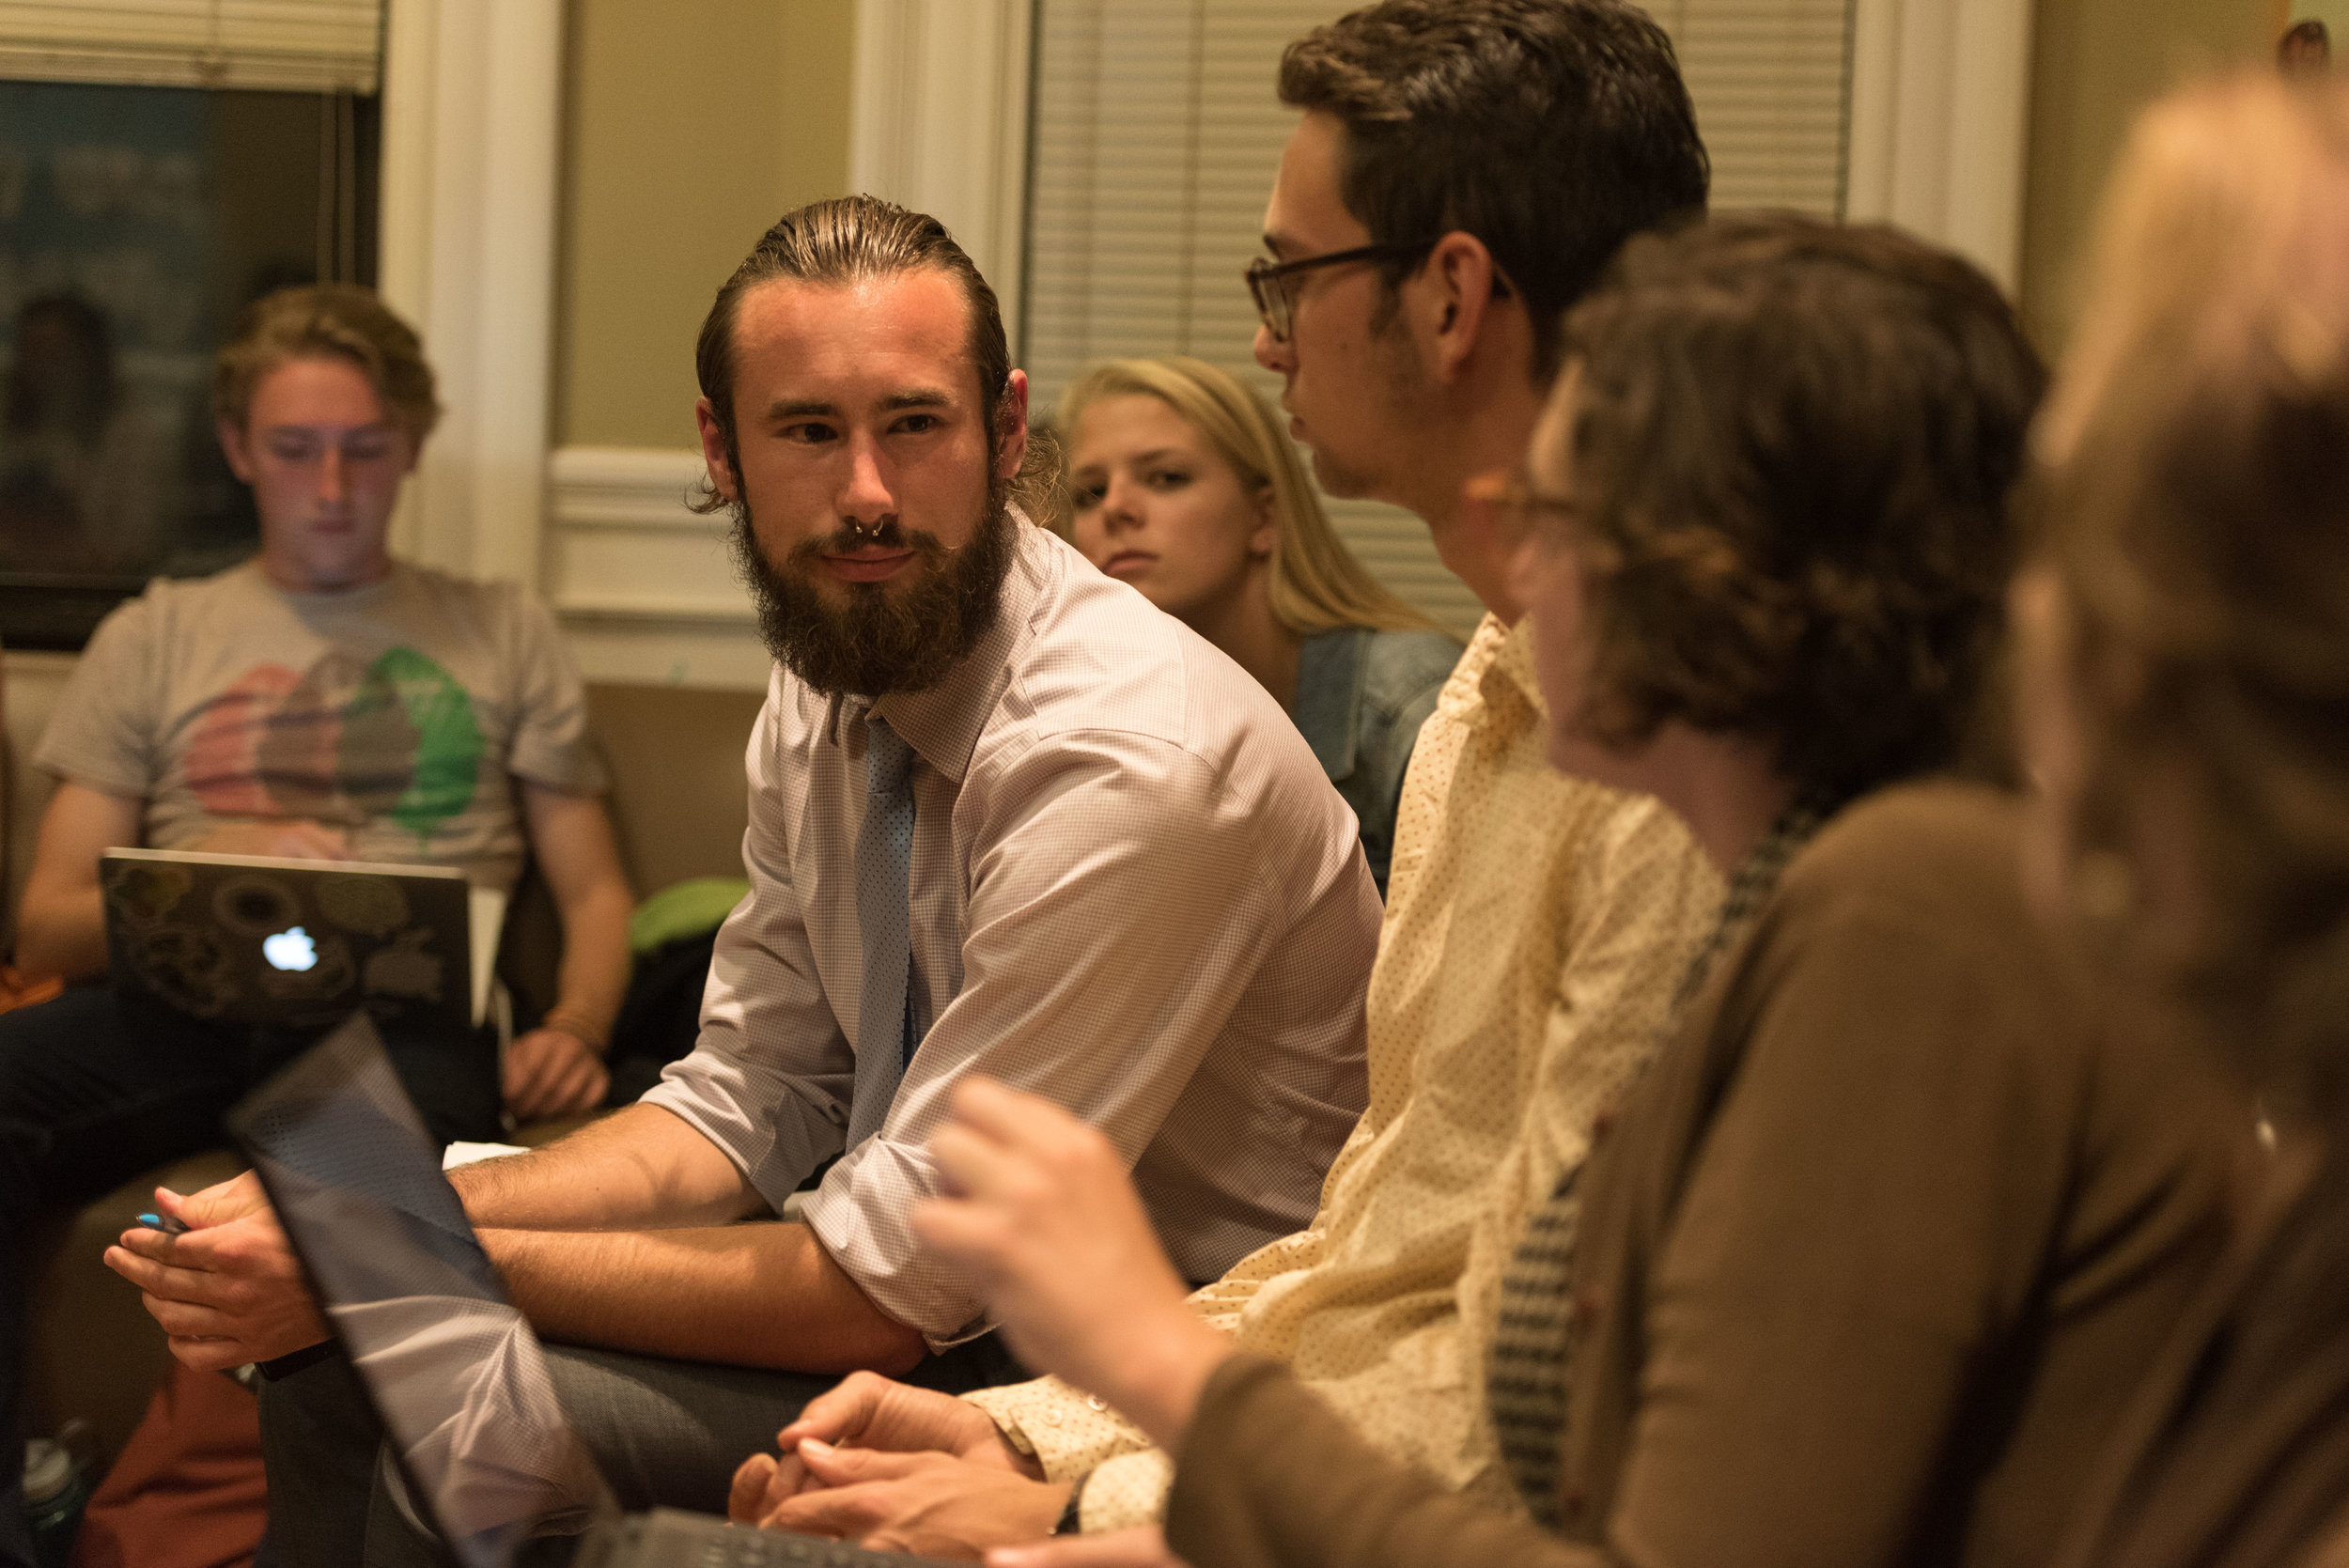  DivestNU co-founder Austin Williams, left, listens to member Alissa Zimmer as they discuss their plans to protest the 2016 State of the University event on the night of Tuesday, Oct. 18, 2016. The meeting served as both planning and debriefing for t